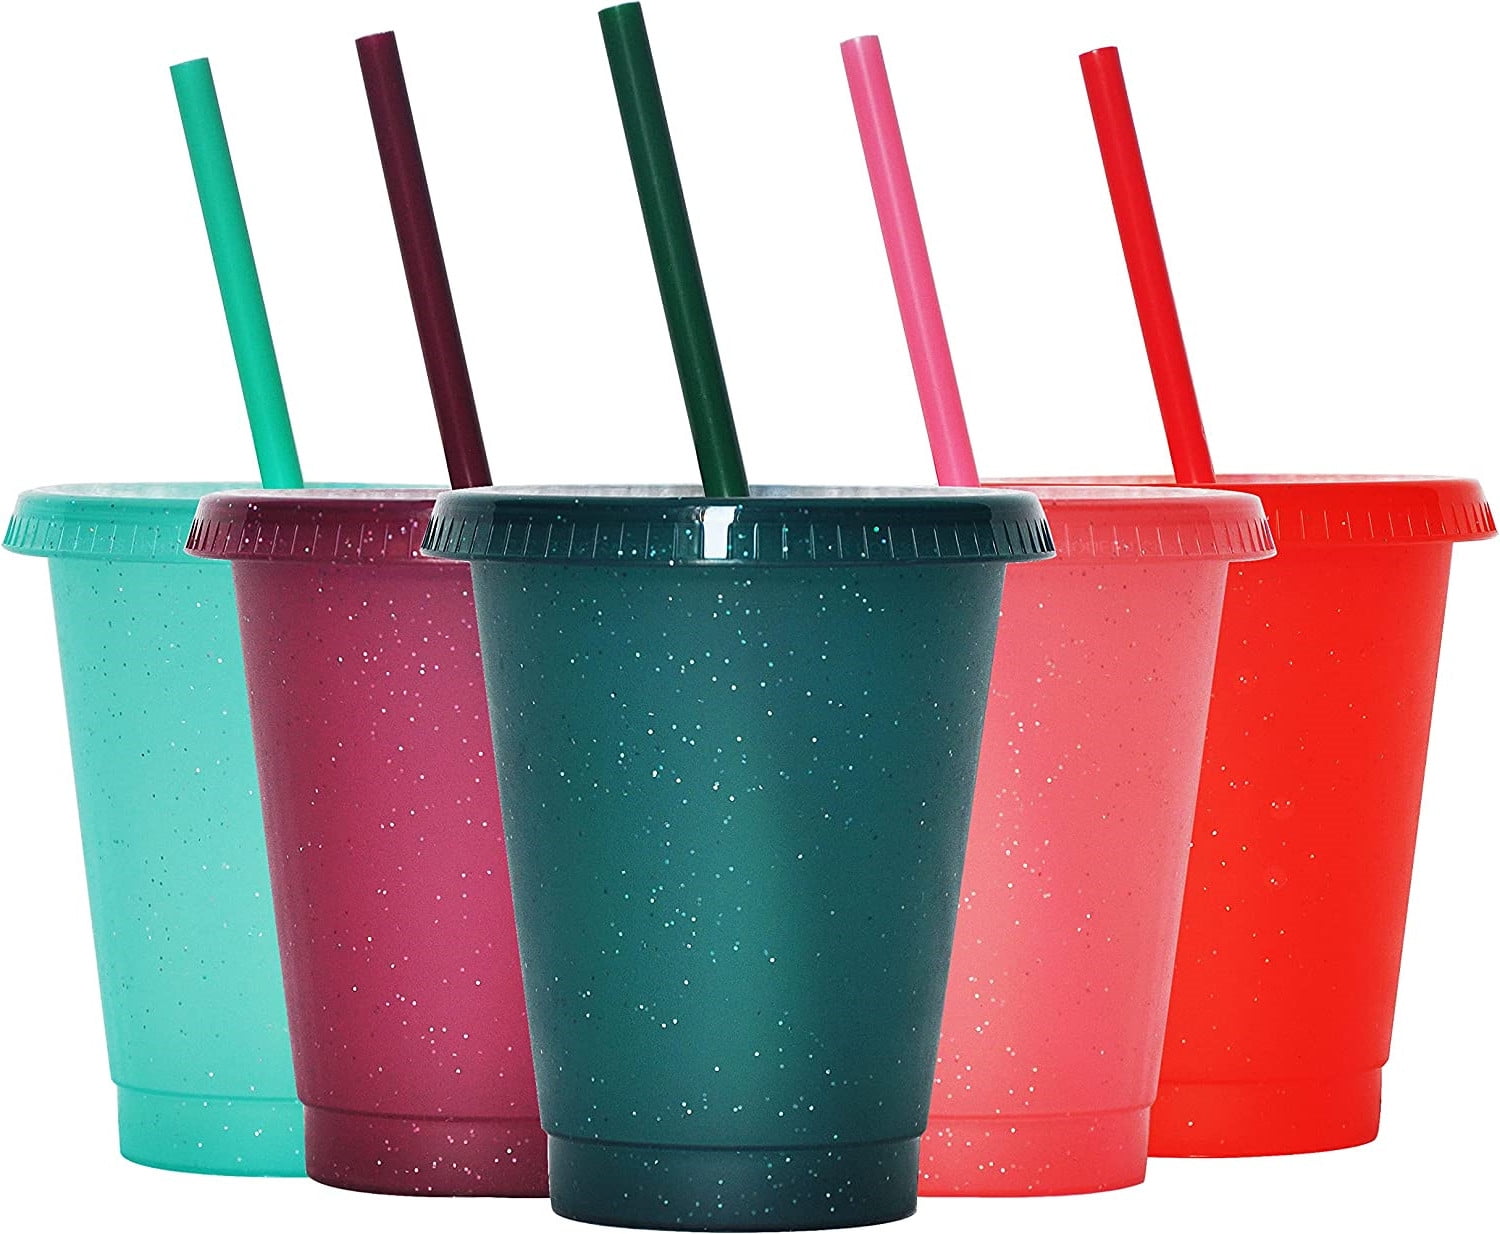 Eco Friendly Reusable Plastic Straws For Bulk Tumblers With Straws 9.45  Inches Extra Long Flexible Cups For Parties And Events From Kevinliu2765,  $0.09